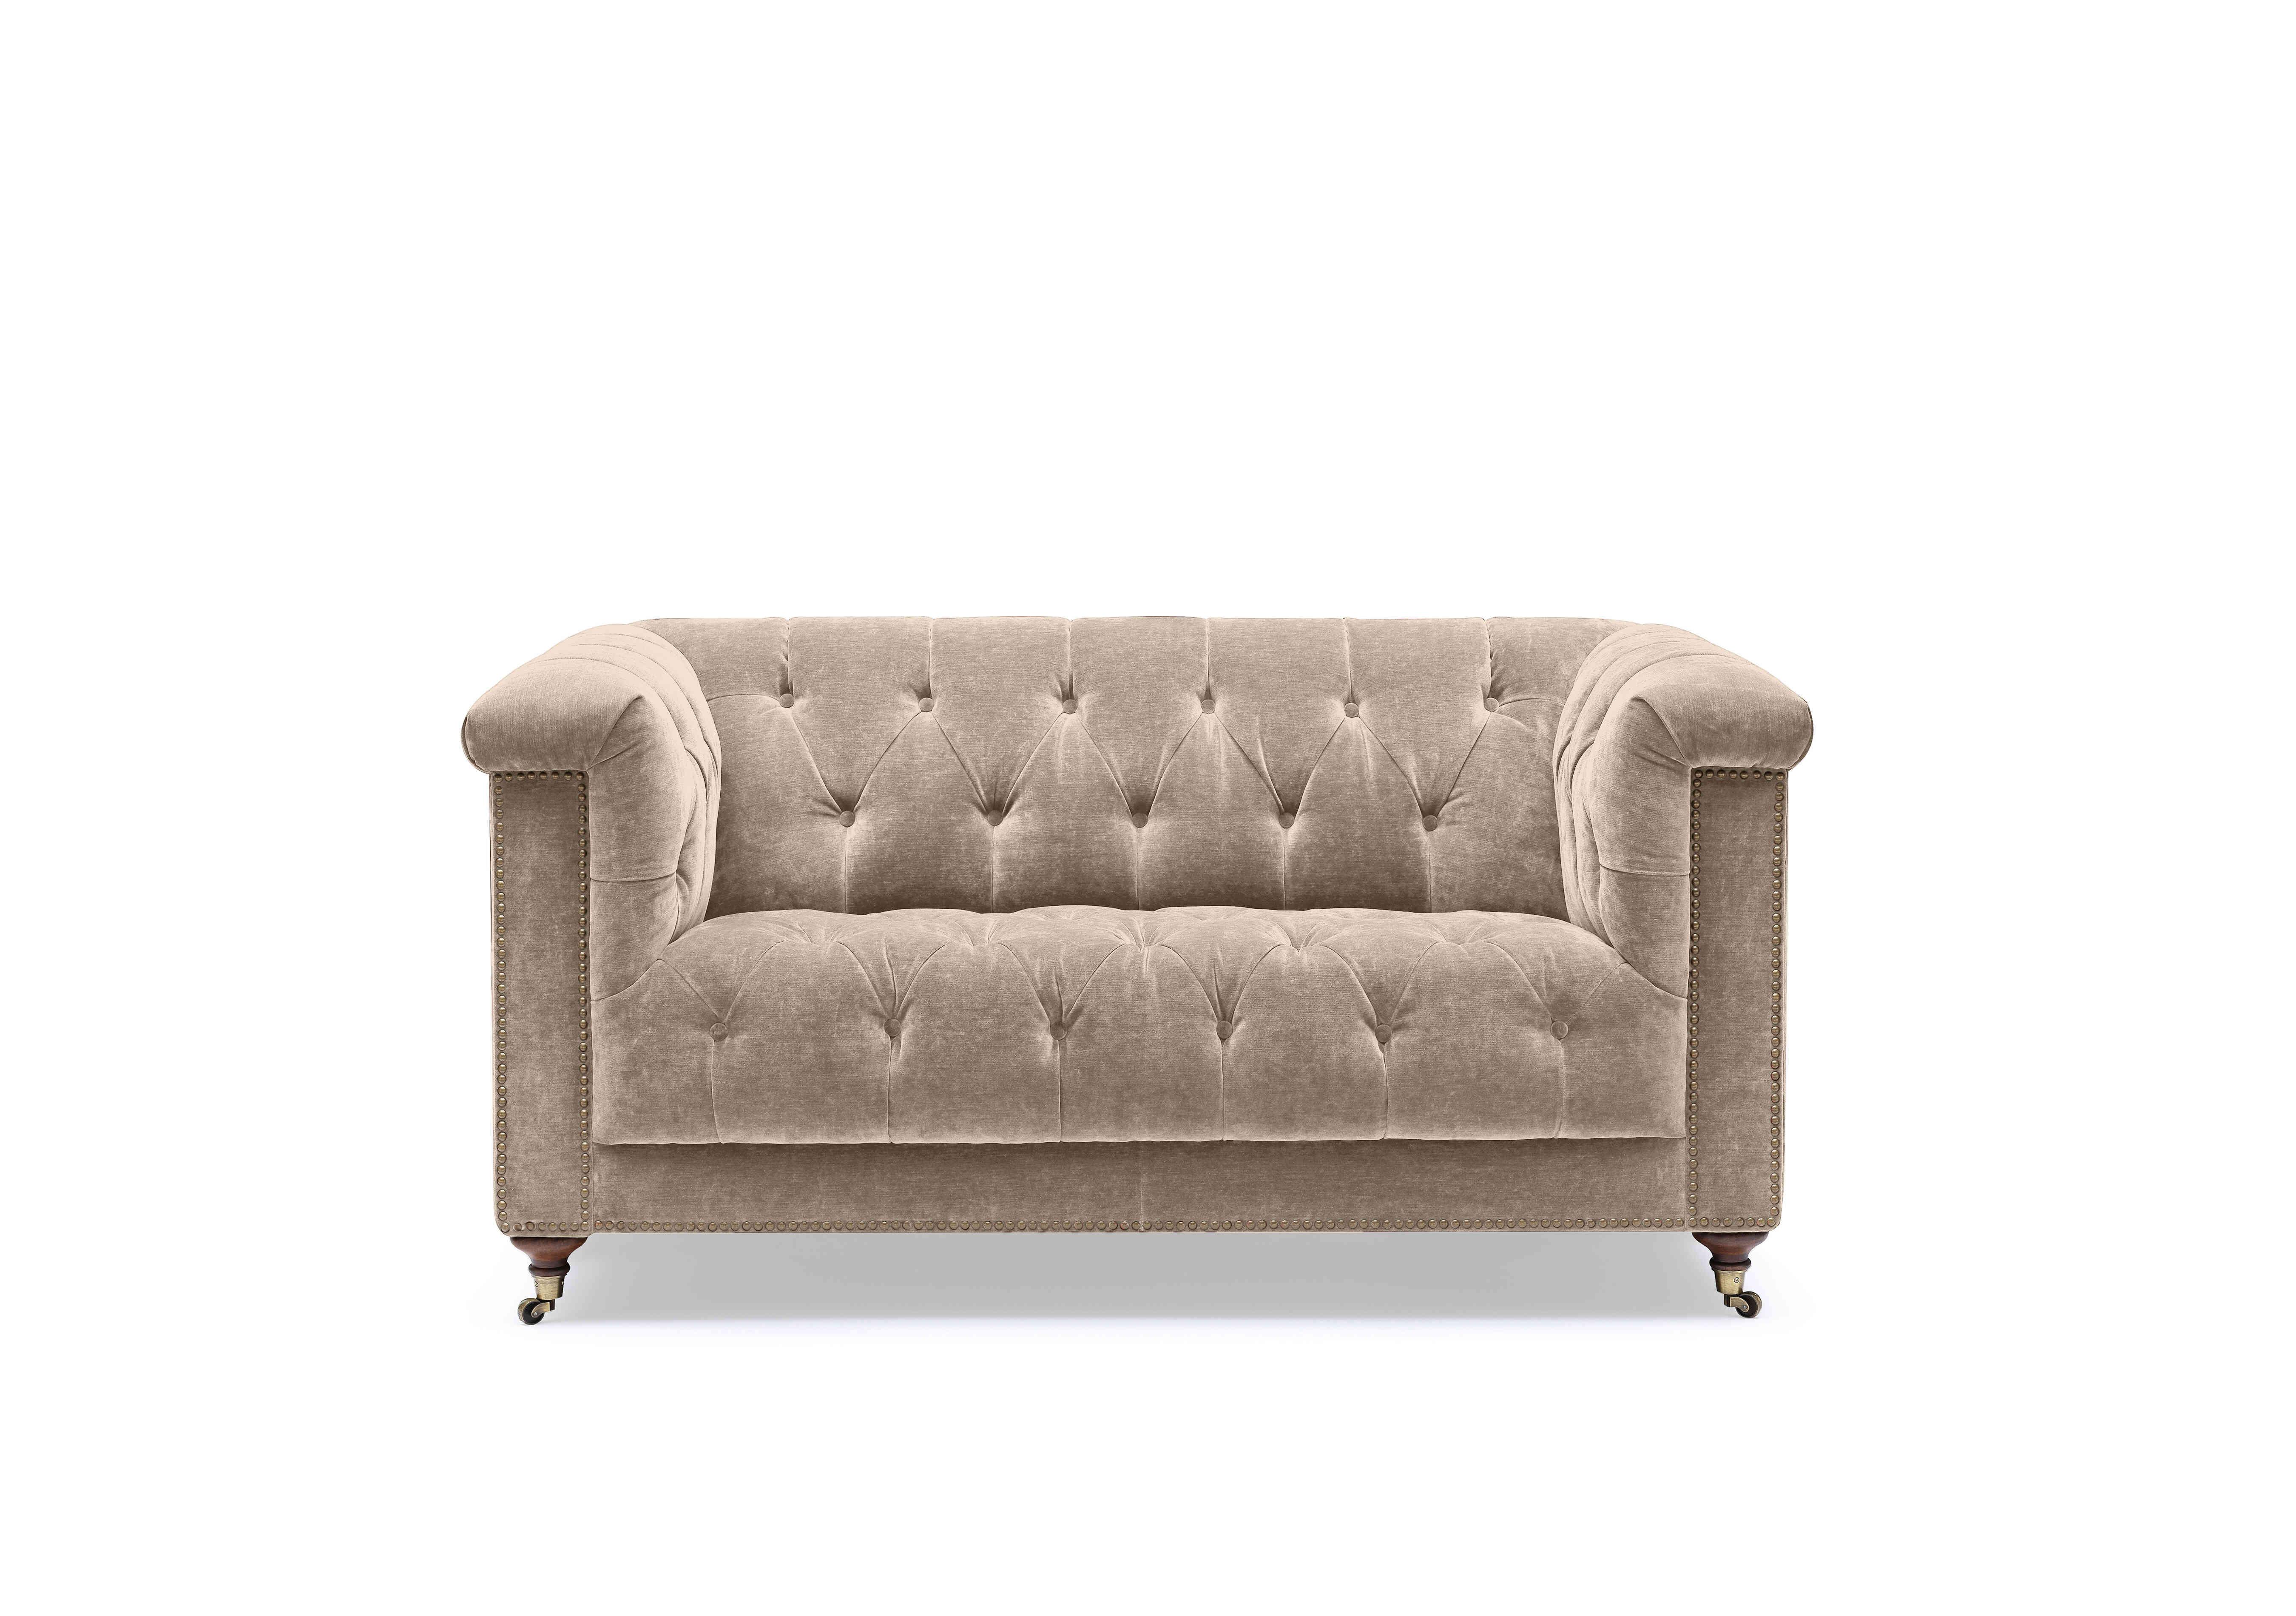 Wallace 2 Seater Fabric Chesterfield Sofa in X3y1-W022 Barley on Furniture Village